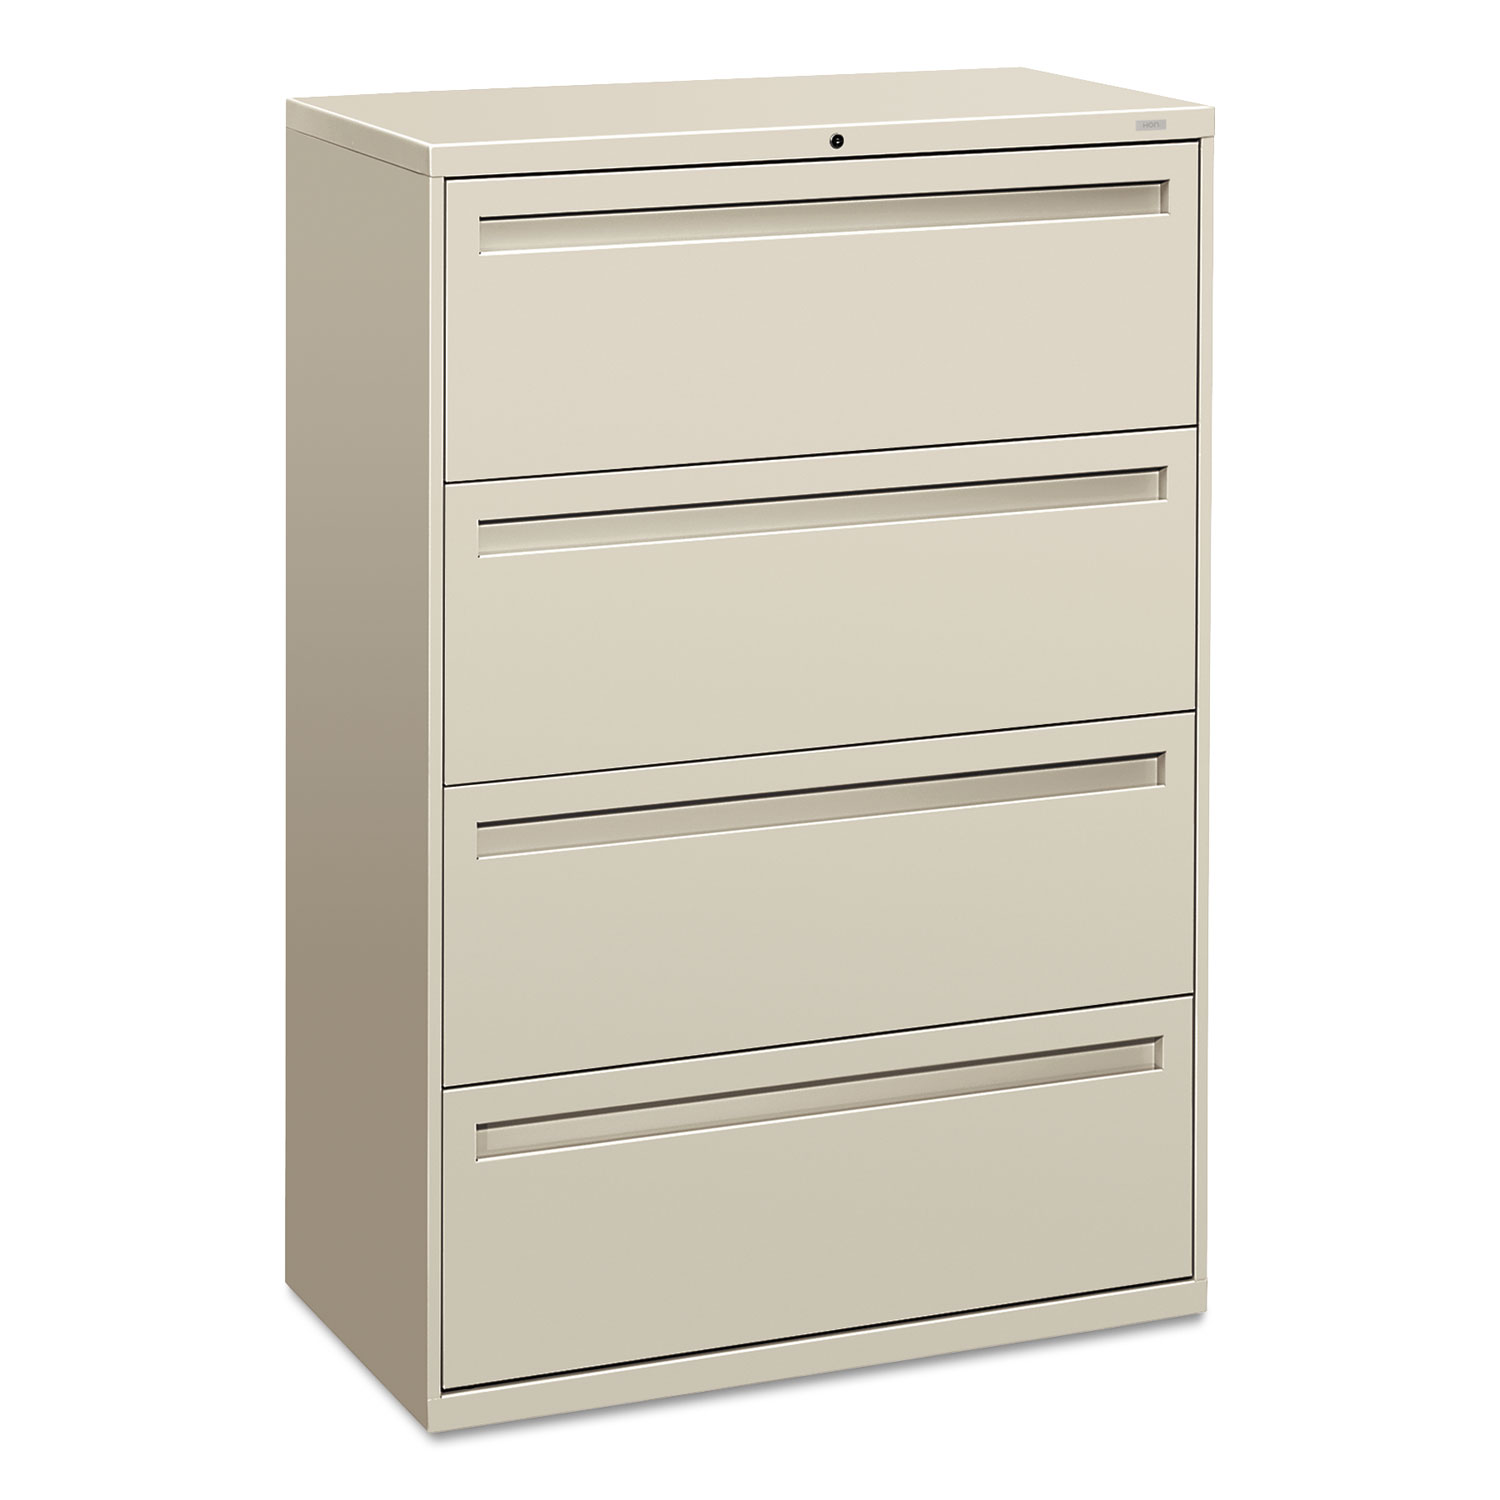 700 Series Four-Drawer Lateral File, 36w x 18d x 52 1/2h, Light Gray